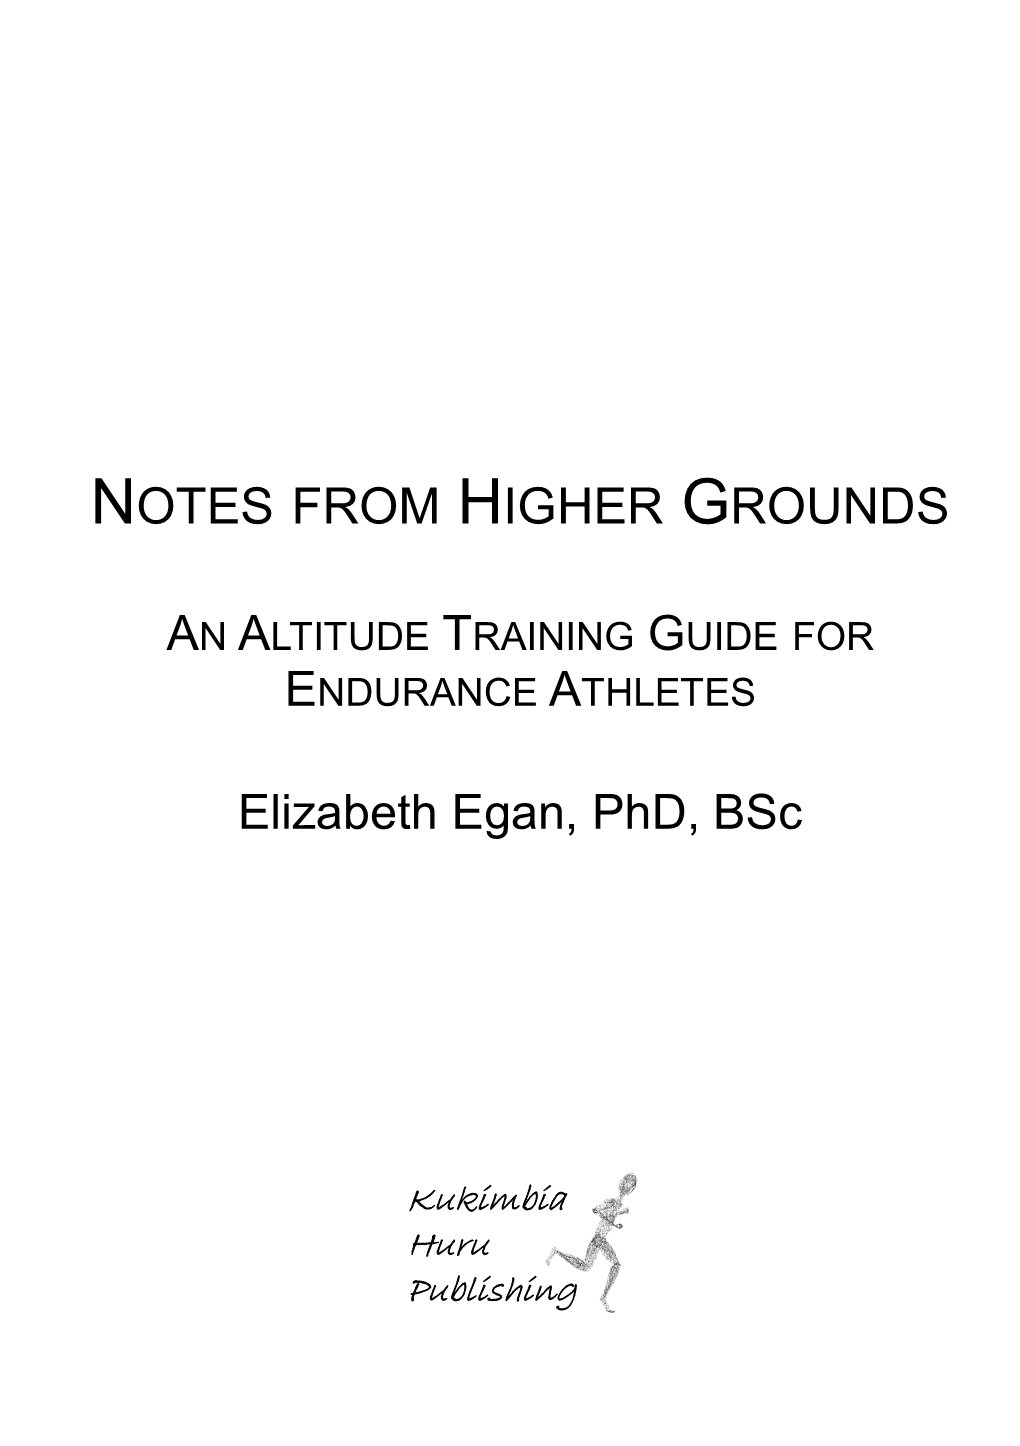 Notes from Higher Grounds